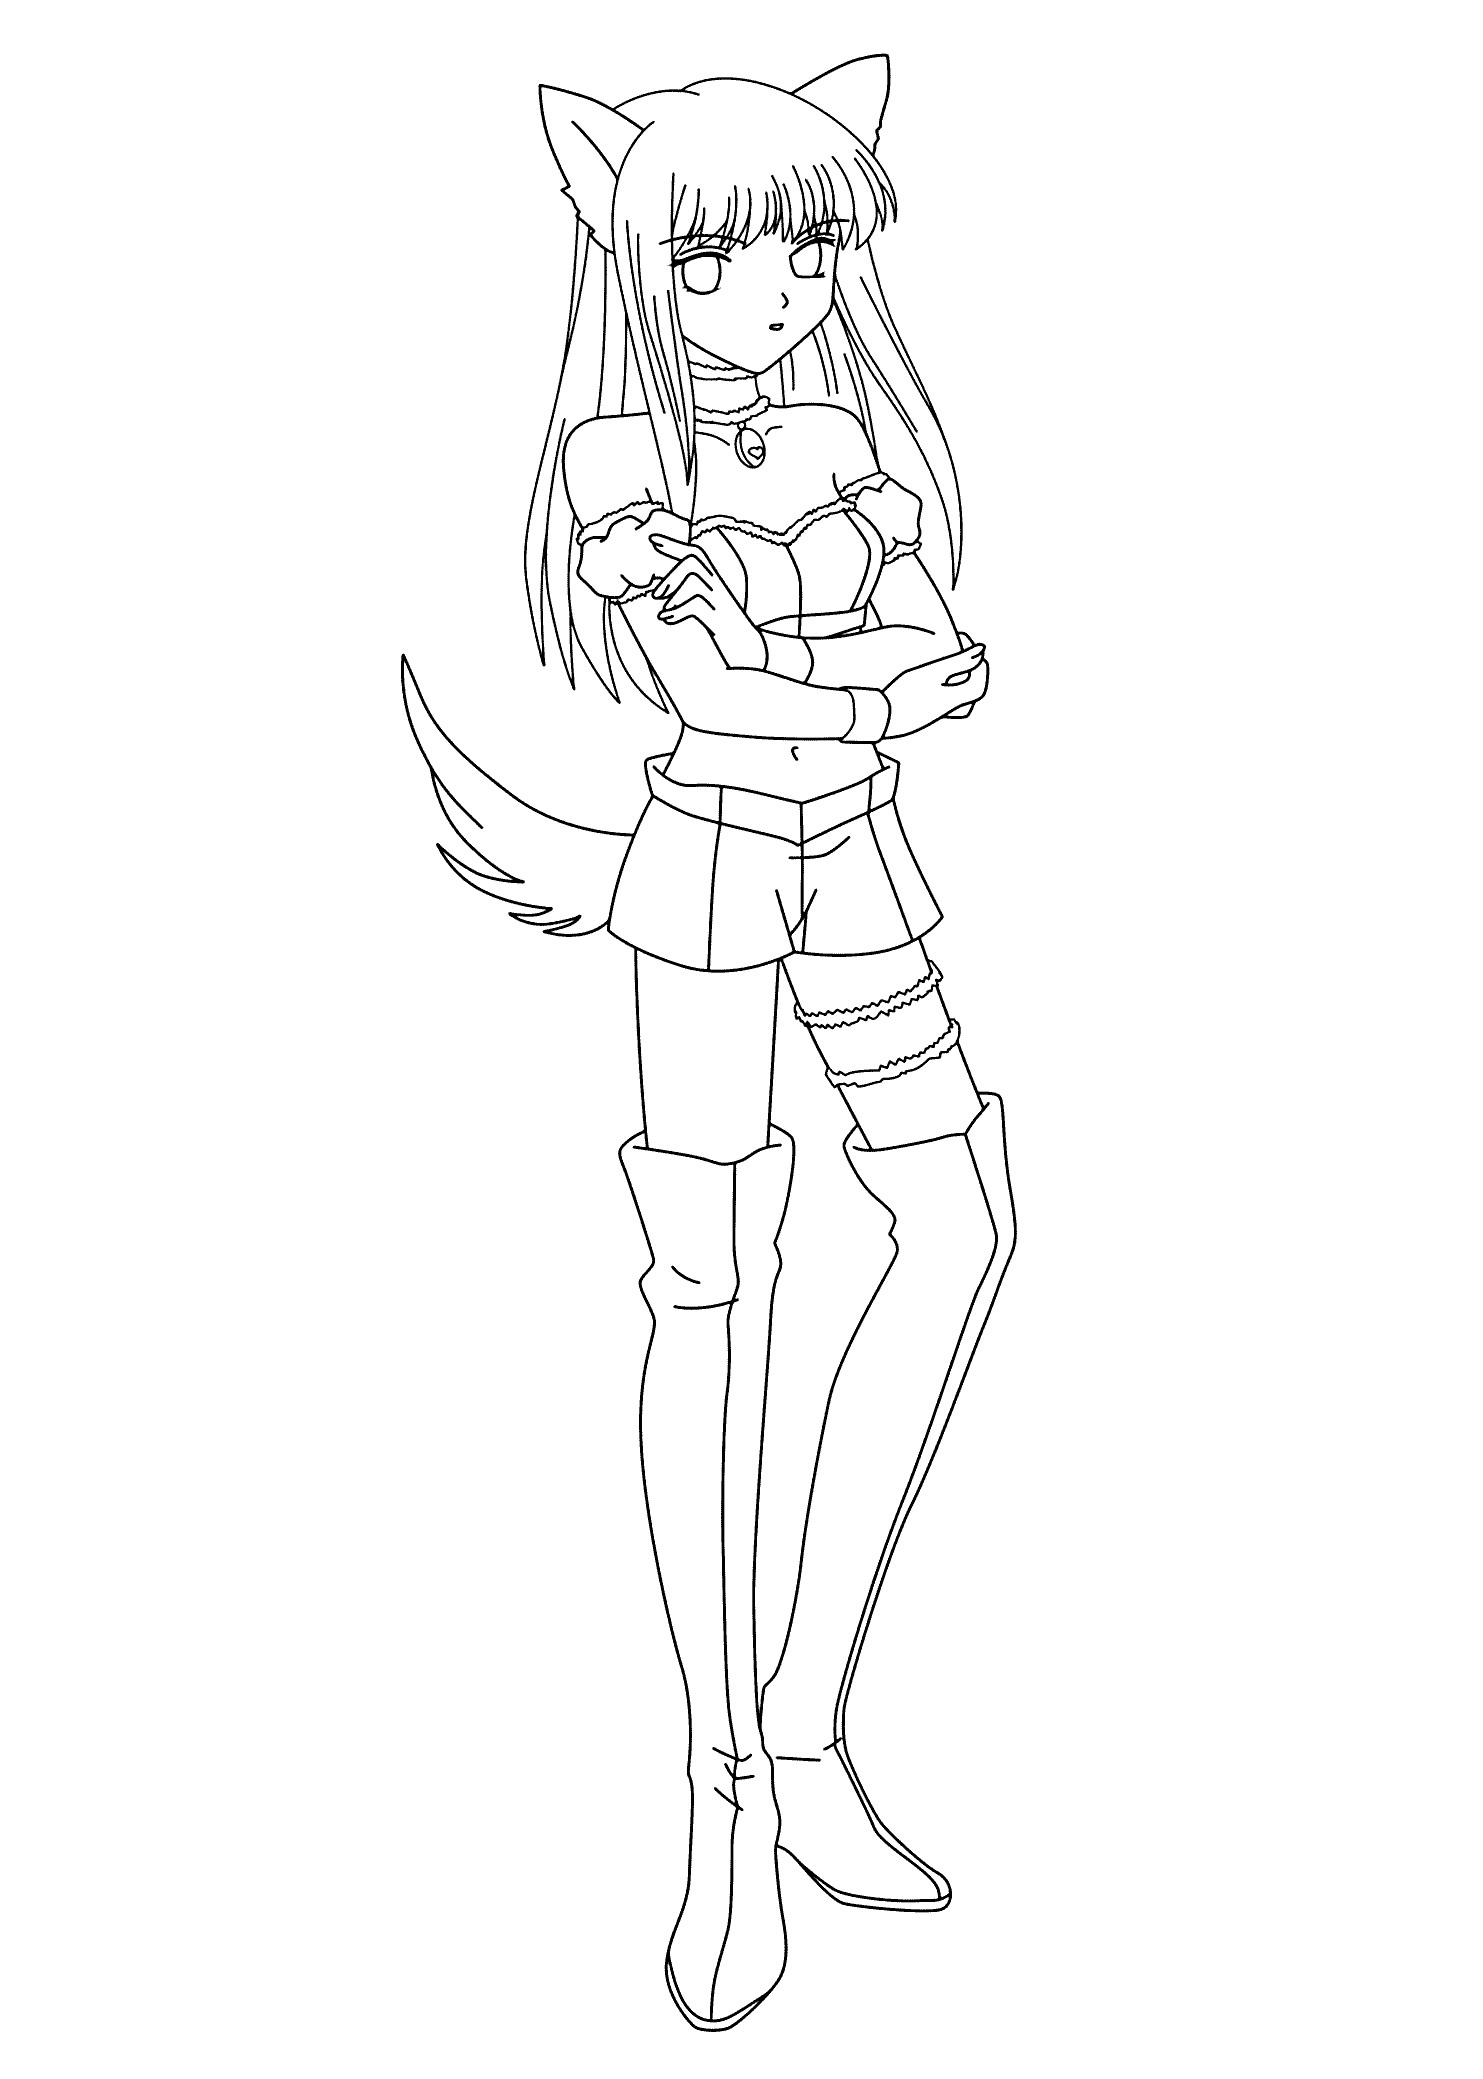 Anime Cat Girl Coloring Pages
 Anime Girl Coloring Pages coloringsuite